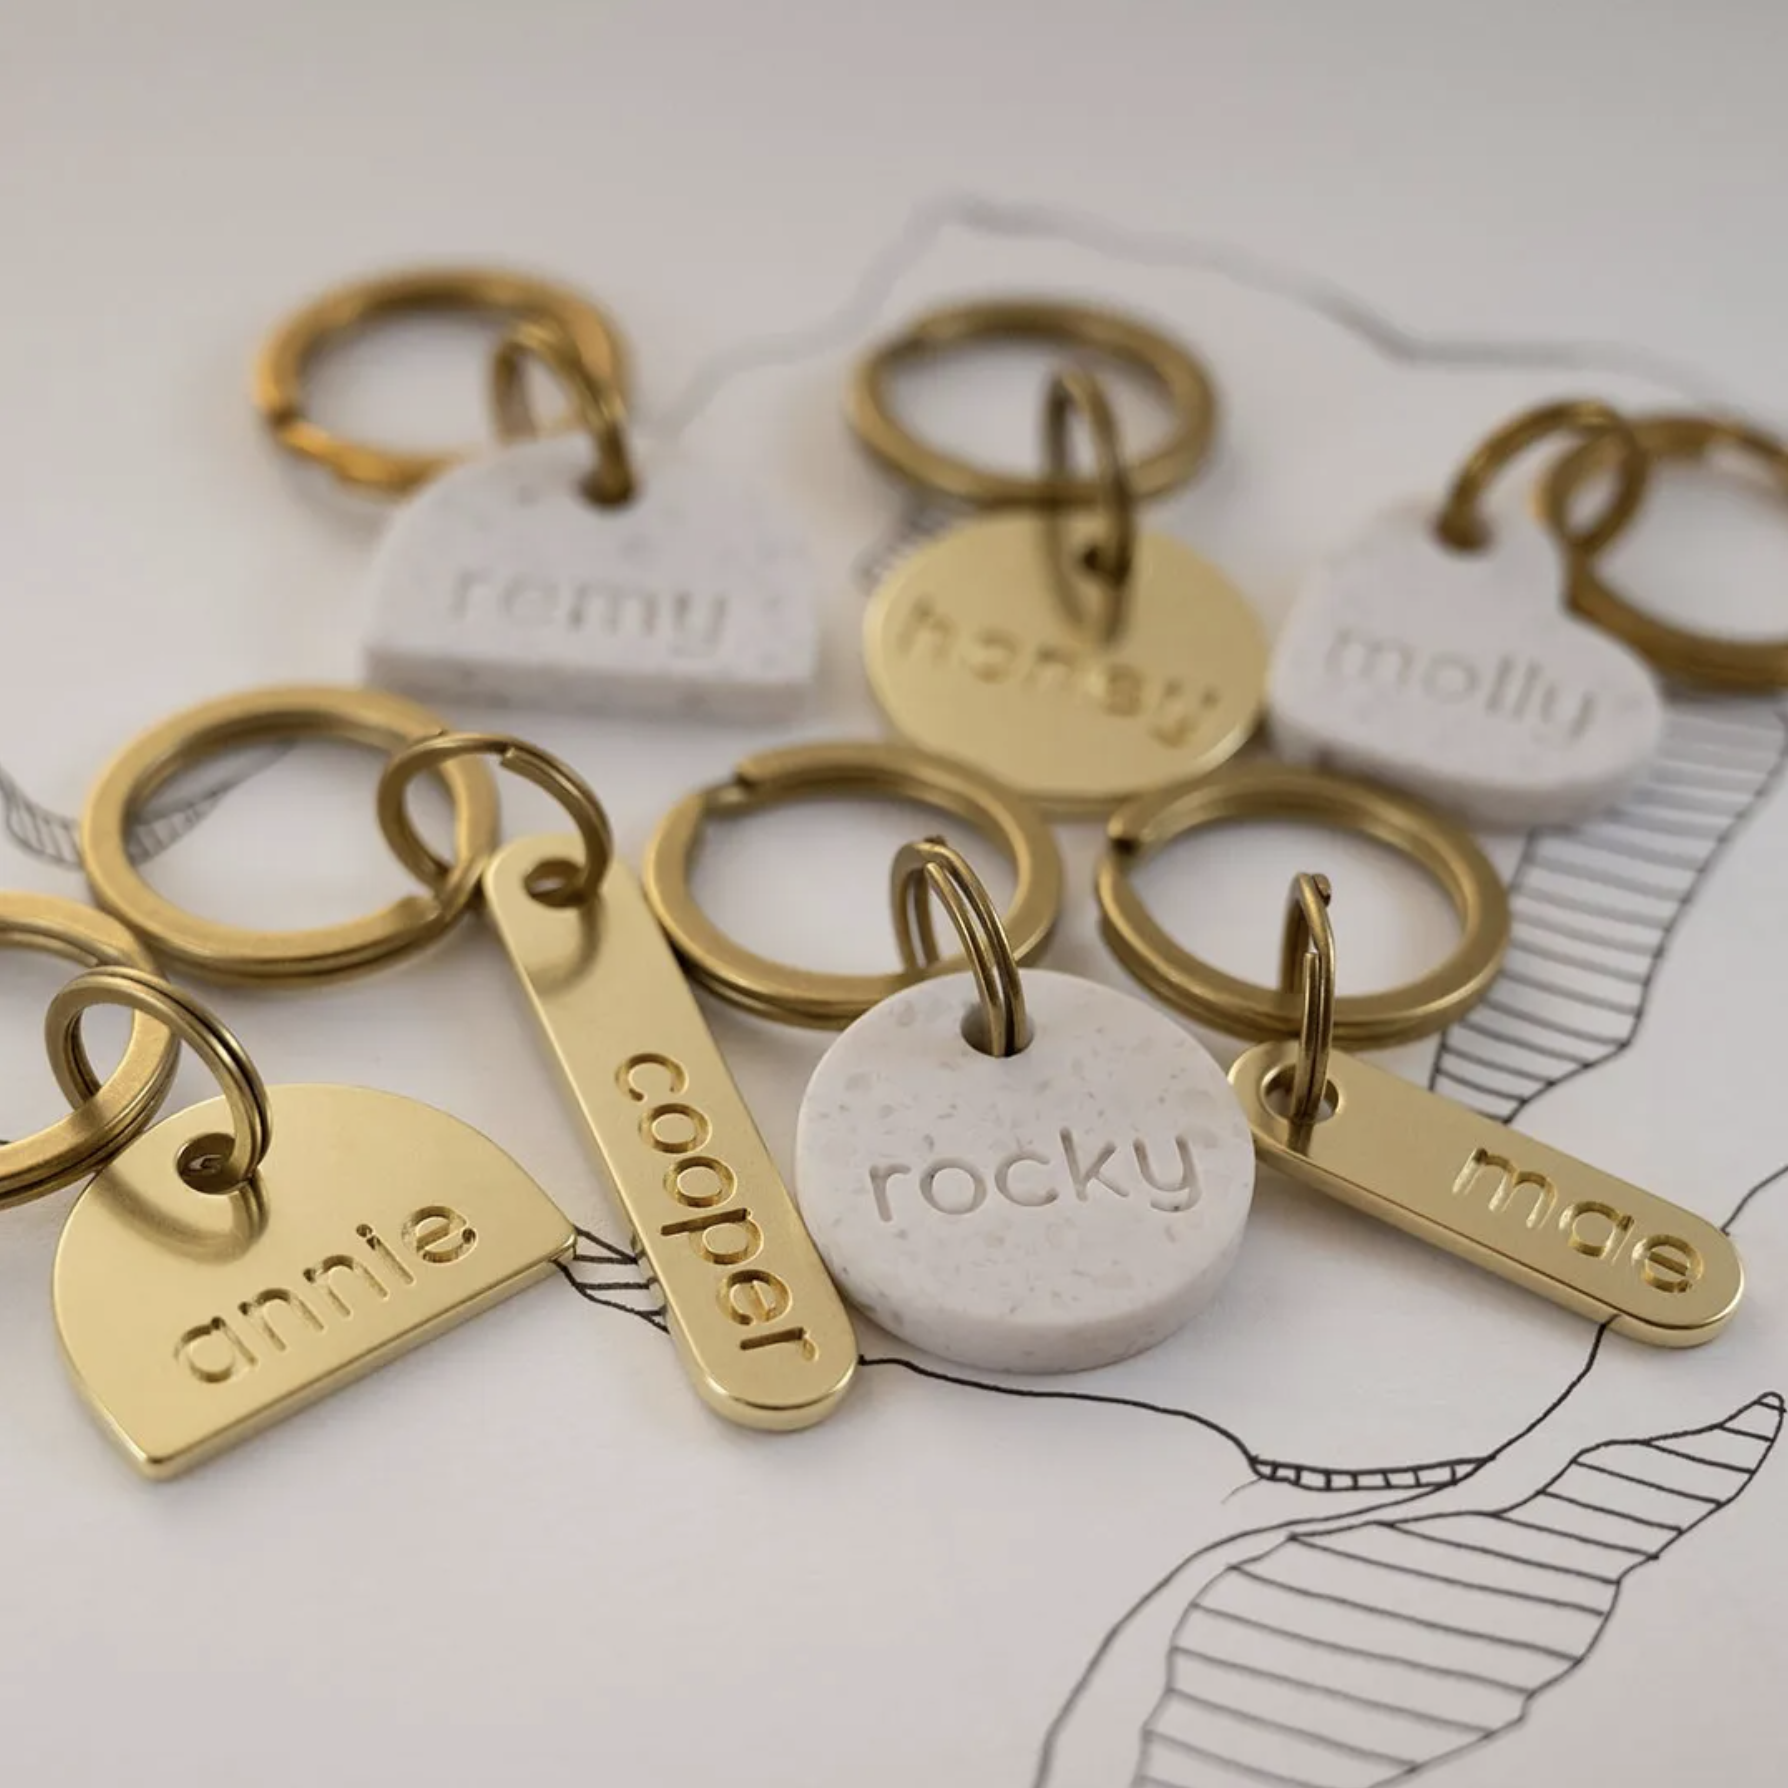 Onoma Premium Pet Tags in Brass and Stone via Onoma Pet Tags (Image via Instagram @onoma.tags)